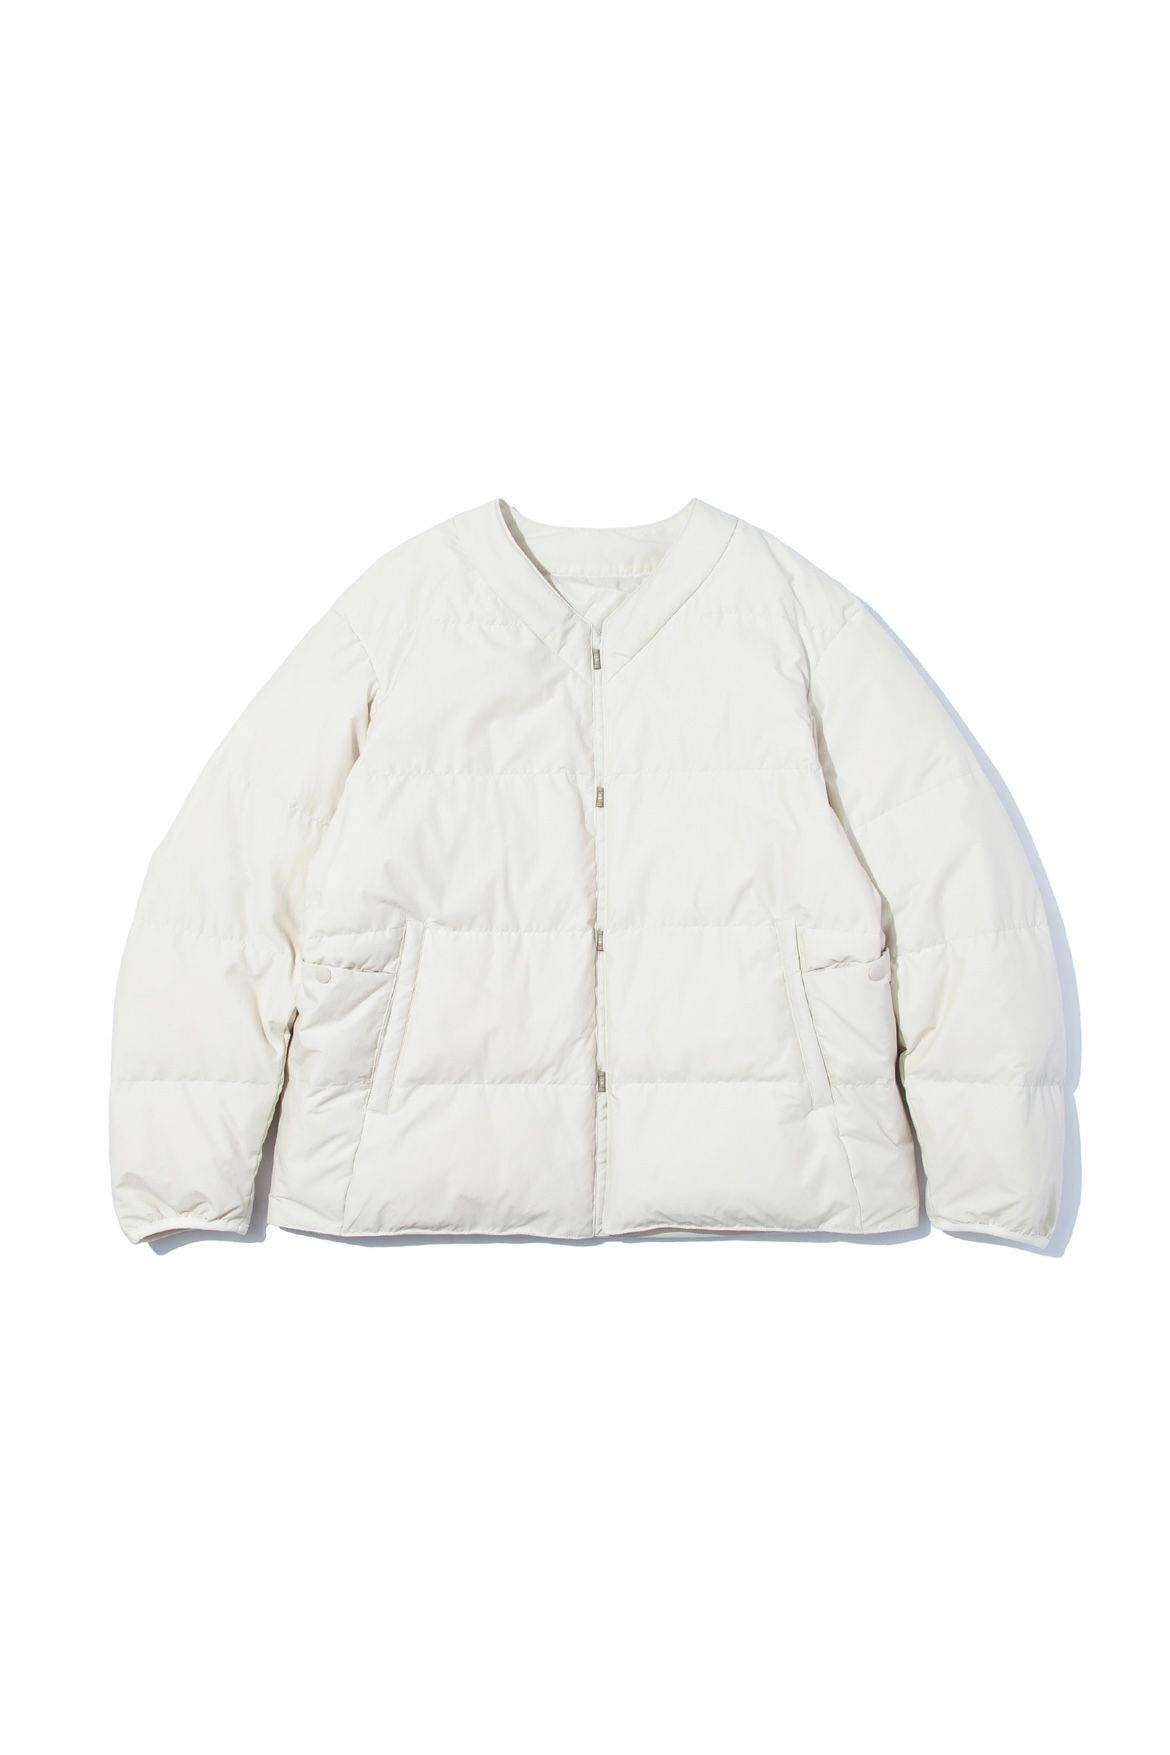 F/CE. - 【先行予約】REVERSIBLE RECYCLE DOWN CARDIGAN -ivory- 23aw